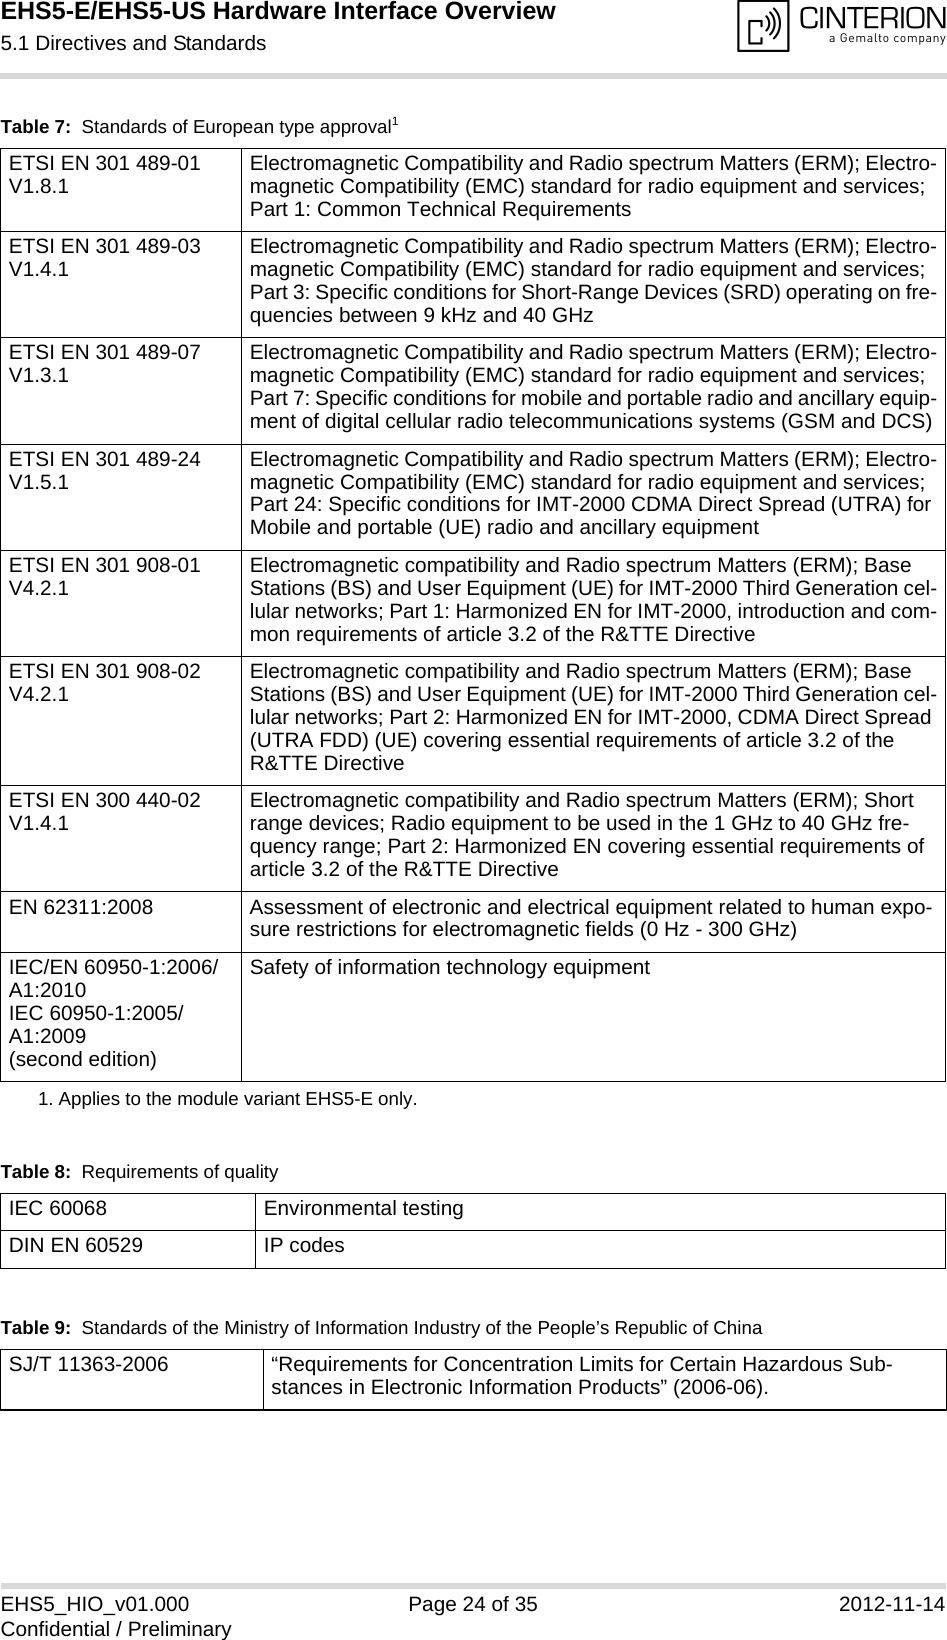 EHS5-E/EHS5-US Hardware Interface Overview5.1 Directives and Standards28EHS5_HIO_v01.000 Page 24 of 35 2012-11-14Confidential / PreliminaryETSI EN 301 489-01 V1.8.1 Electromagnetic Compatibility and Radio spectrum Matters (ERM); Electro-magnetic Compatibility (EMC) standard for radio equipment and services; Part 1: Common Technical RequirementsETSI EN 301 489-03 V1.4.1 Electromagnetic Compatibility and Radio spectrum Matters (ERM); Electro-magnetic Compatibility (EMC) standard for radio equipment and services; Part 3: Specific conditions for Short-Range Devices (SRD) operating on fre-quencies between 9 kHz and 40 GHz ETSI EN 301 489-07 V1.3.1 Electromagnetic Compatibility and Radio spectrum Matters (ERM); Electro-magnetic Compatibility (EMC) standard for radio equipment and services; Part 7: Specific conditions for mobile and portable radio and ancillary equip-ment of digital cellular radio telecommunications systems (GSM and DCS)ETSI EN 301 489-24 V1.5.1 Electromagnetic Compatibility and Radio spectrum Matters (ERM); Electro-magnetic Compatibility (EMC) standard for radio equipment and services; Part 24: Specific conditions for IMT-2000 CDMA Direct Spread (UTRA) for Mobile and portable (UE) radio and ancillary equipmentETSI EN 301 908-01 V4.2.1 Electromagnetic compatibility and Radio spectrum Matters (ERM); Base Stations (BS) and User Equipment (UE) for IMT-2000 Third Generation cel-lular networks; Part 1: Harmonized EN for IMT-2000, introduction and com-mon requirements of article 3.2 of the R&amp;TTE DirectiveETSI EN 301 908-02 V4.2.1 Electromagnetic compatibility and Radio spectrum Matters (ERM); Base Stations (BS) and User Equipment (UE) for IMT-2000 Third Generation cel-lular networks; Part 2: Harmonized EN for IMT-2000, CDMA Direct Spread (UTRA FDD) (UE) covering essential requirements of article 3.2 of the R&amp;TTE DirectiveETSI EN 300 440-02 V1.4.1  Electromagnetic compatibility and Radio spectrum Matters (ERM); Short range devices; Radio equipment to be used in the 1 GHz to 40 GHz fre-quency range; Part 2: Harmonized EN covering essential requirements of article 3.2 of the R&amp;TTE Directive EN 62311:2008 Assessment of electronic and electrical equipment related to human expo-sure restrictions for electromagnetic fields (0 Hz - 300 GHz)IEC/EN 60950-1:2006/A1:2010IEC 60950-1:2005/A1:2009(second edition)Safety of information technology equipment1. Applies to the module variant EHS5-E only.Table 8:  Requirements of qualityIEC 60068 Environmental testingDIN EN 60529 IP codesTable 9:  Standards of the Ministry of Information Industry of the People’s Republic of ChinaSJ/T 11363-2006  “Requirements for Concentration Limits for Certain Hazardous Sub-stances in Electronic Information Products” (2006-06).Table 7:  Standards of European type approval1